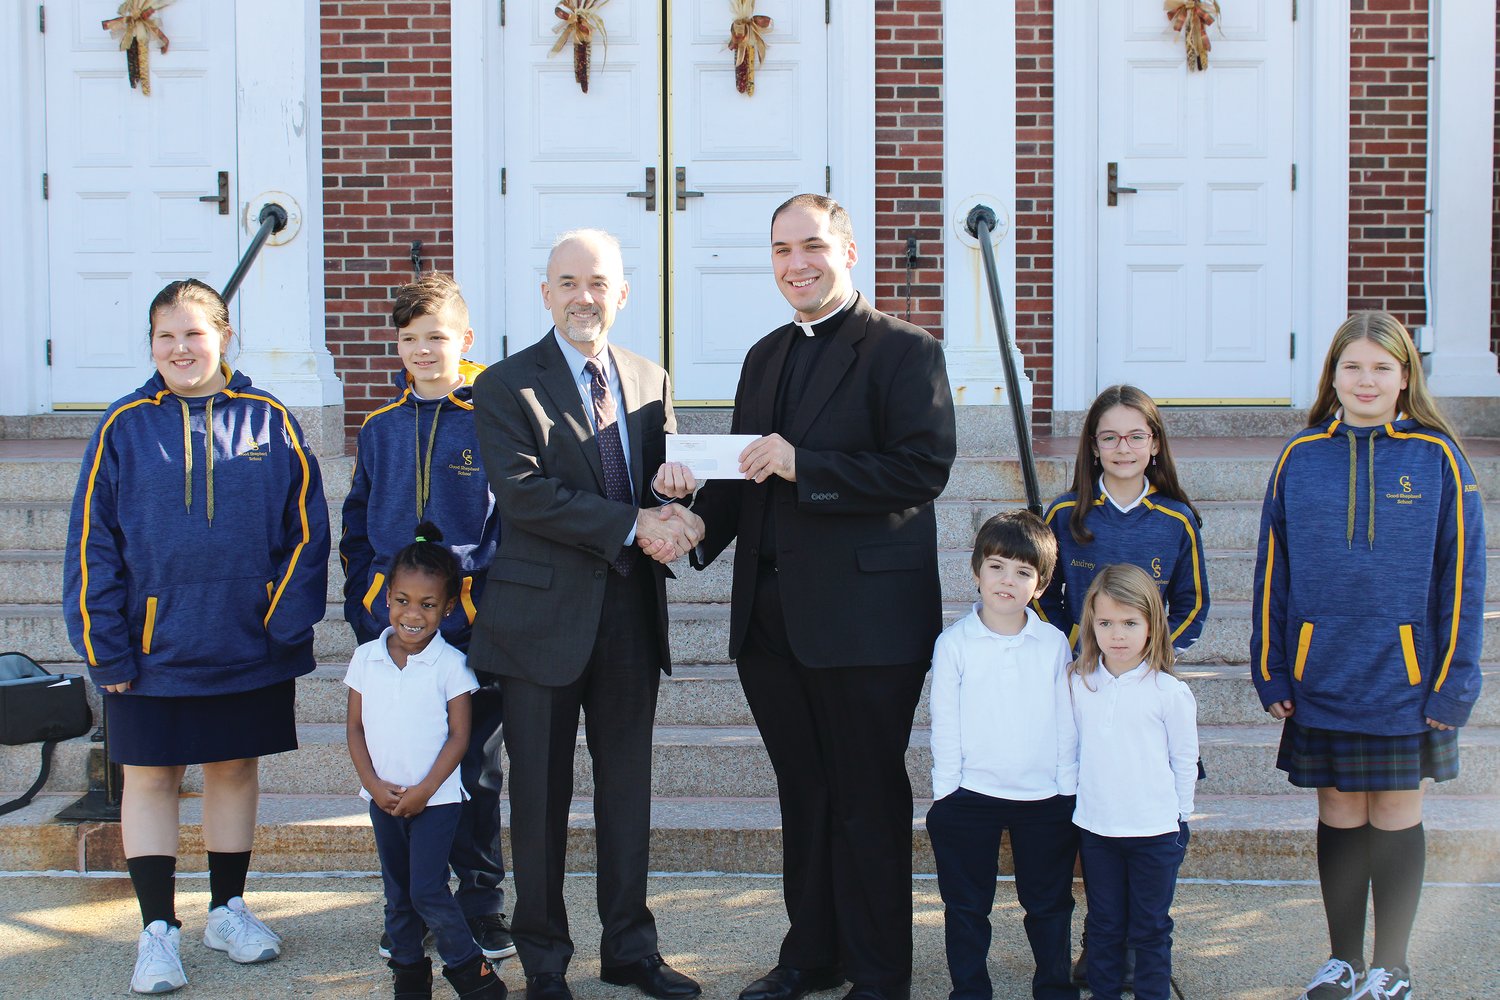 Father Ryan Simas, pastor of St. Joseph’s Parish, presents Mayor Dan Gendron with a donation of $25,000 for the construction of a new splash park in Woonsocket, on Tuesday, Nov. 29.